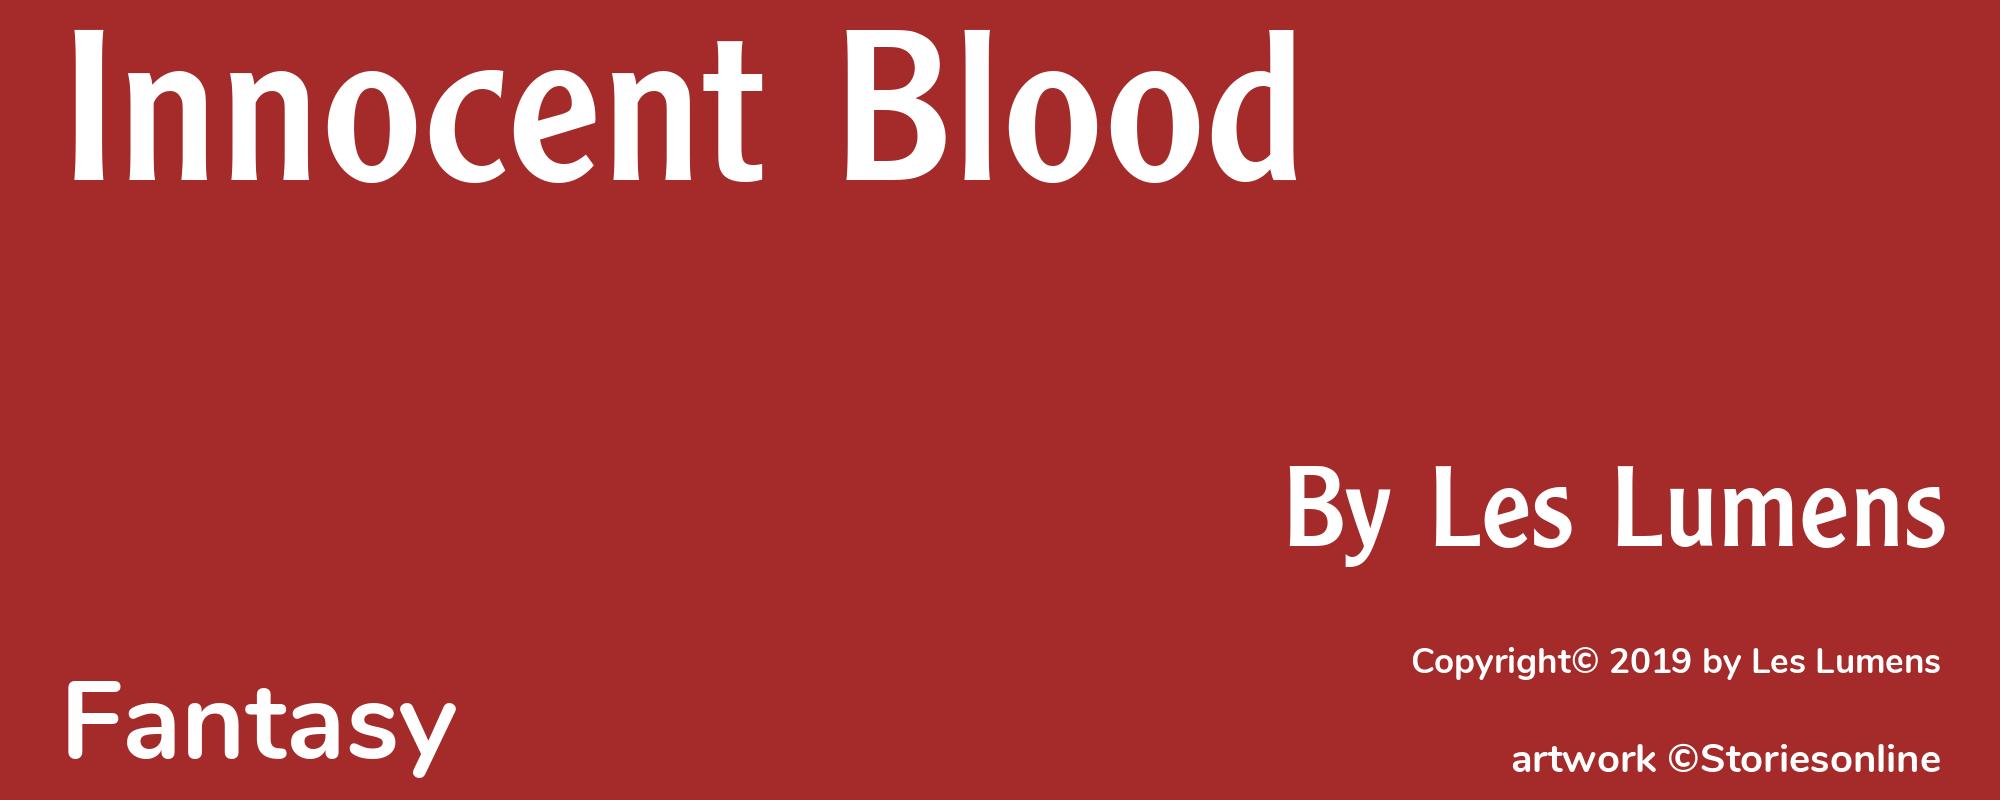 Innocent Blood - Cover